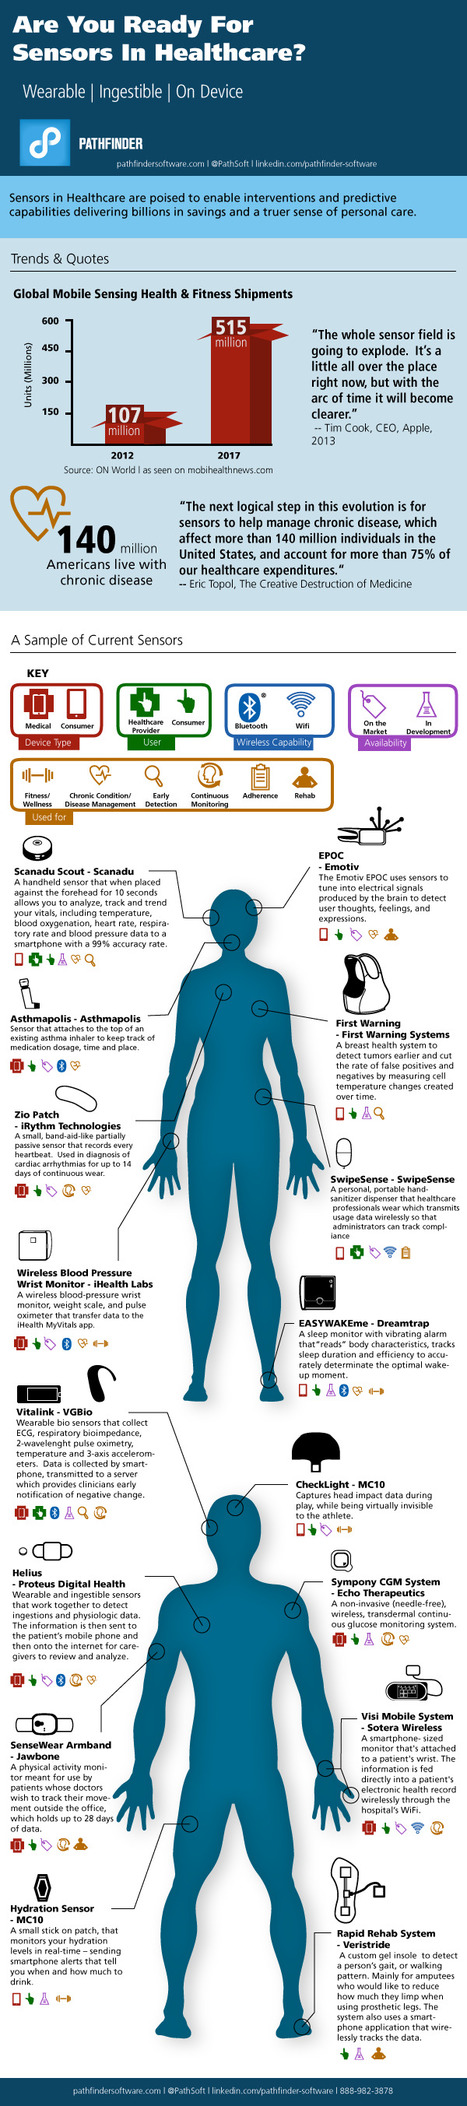 mHealth: Are You Ready for Sensors in Healthcare? | Robótica Educativa! | Scoop.it